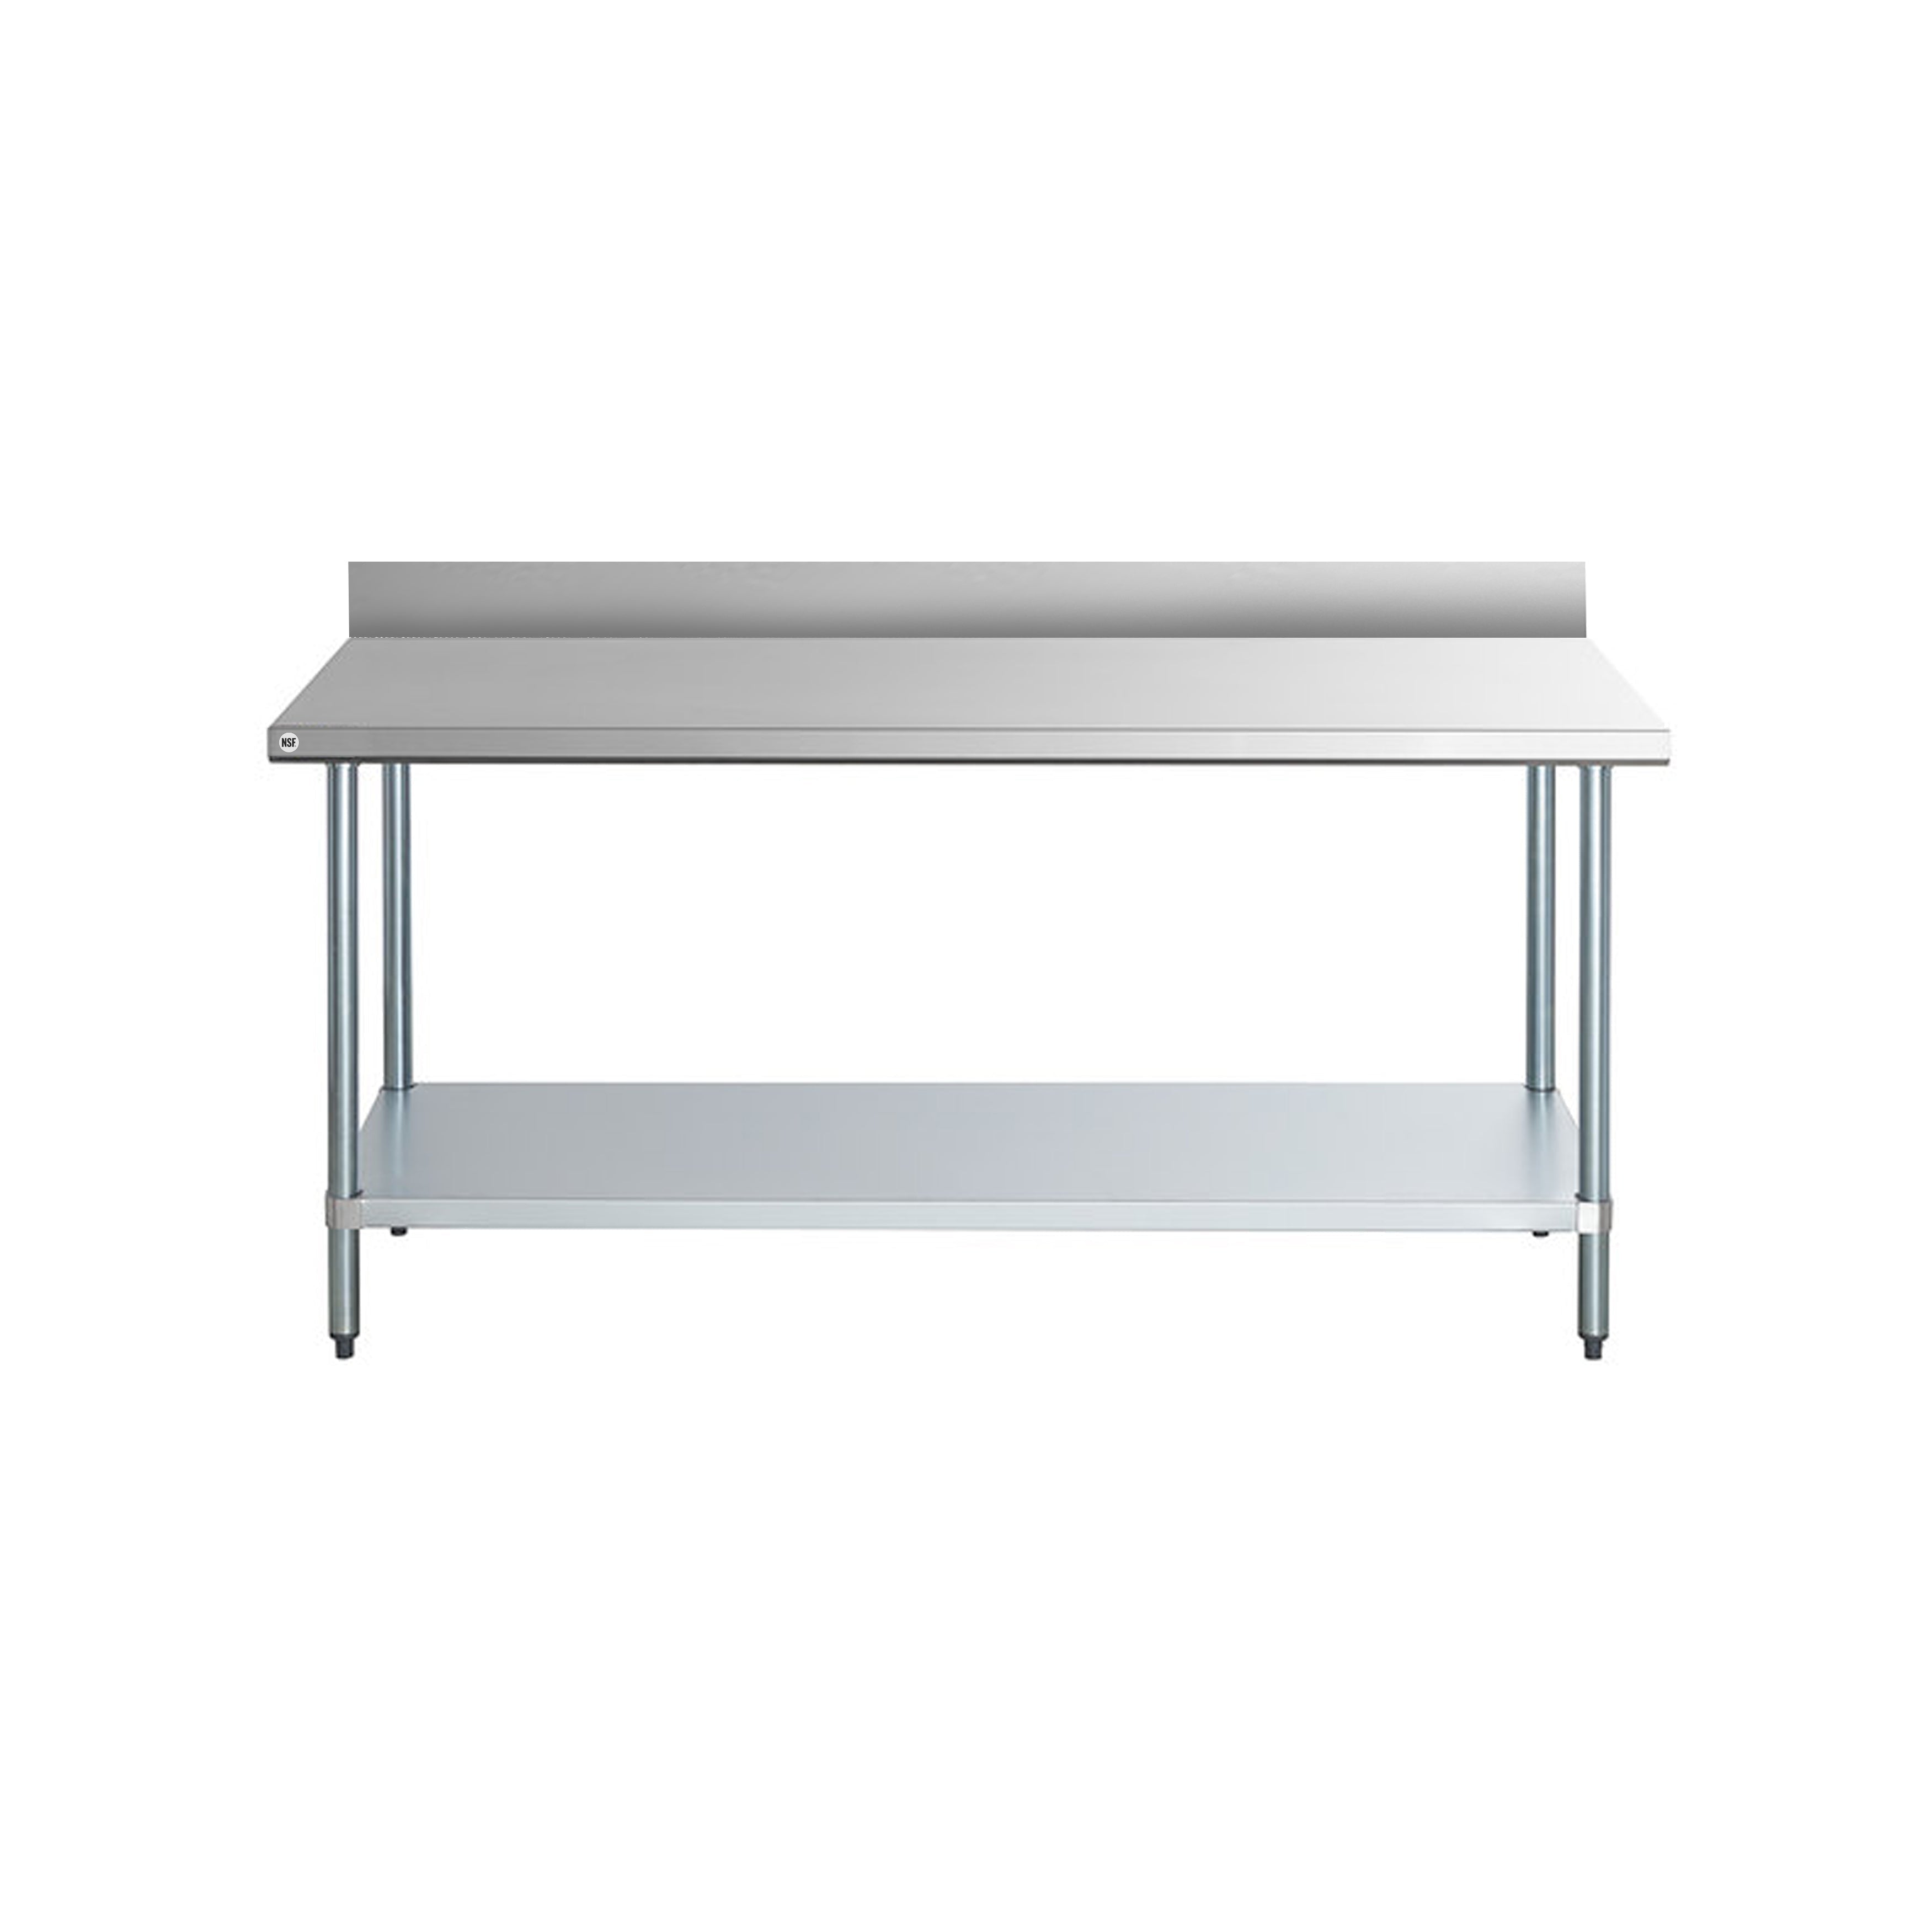 Omcan - 22088, Commercial 30" x 48" Stainless Steel Kitchen Work Table with 4" BackSplash 1100lbs Light Duty